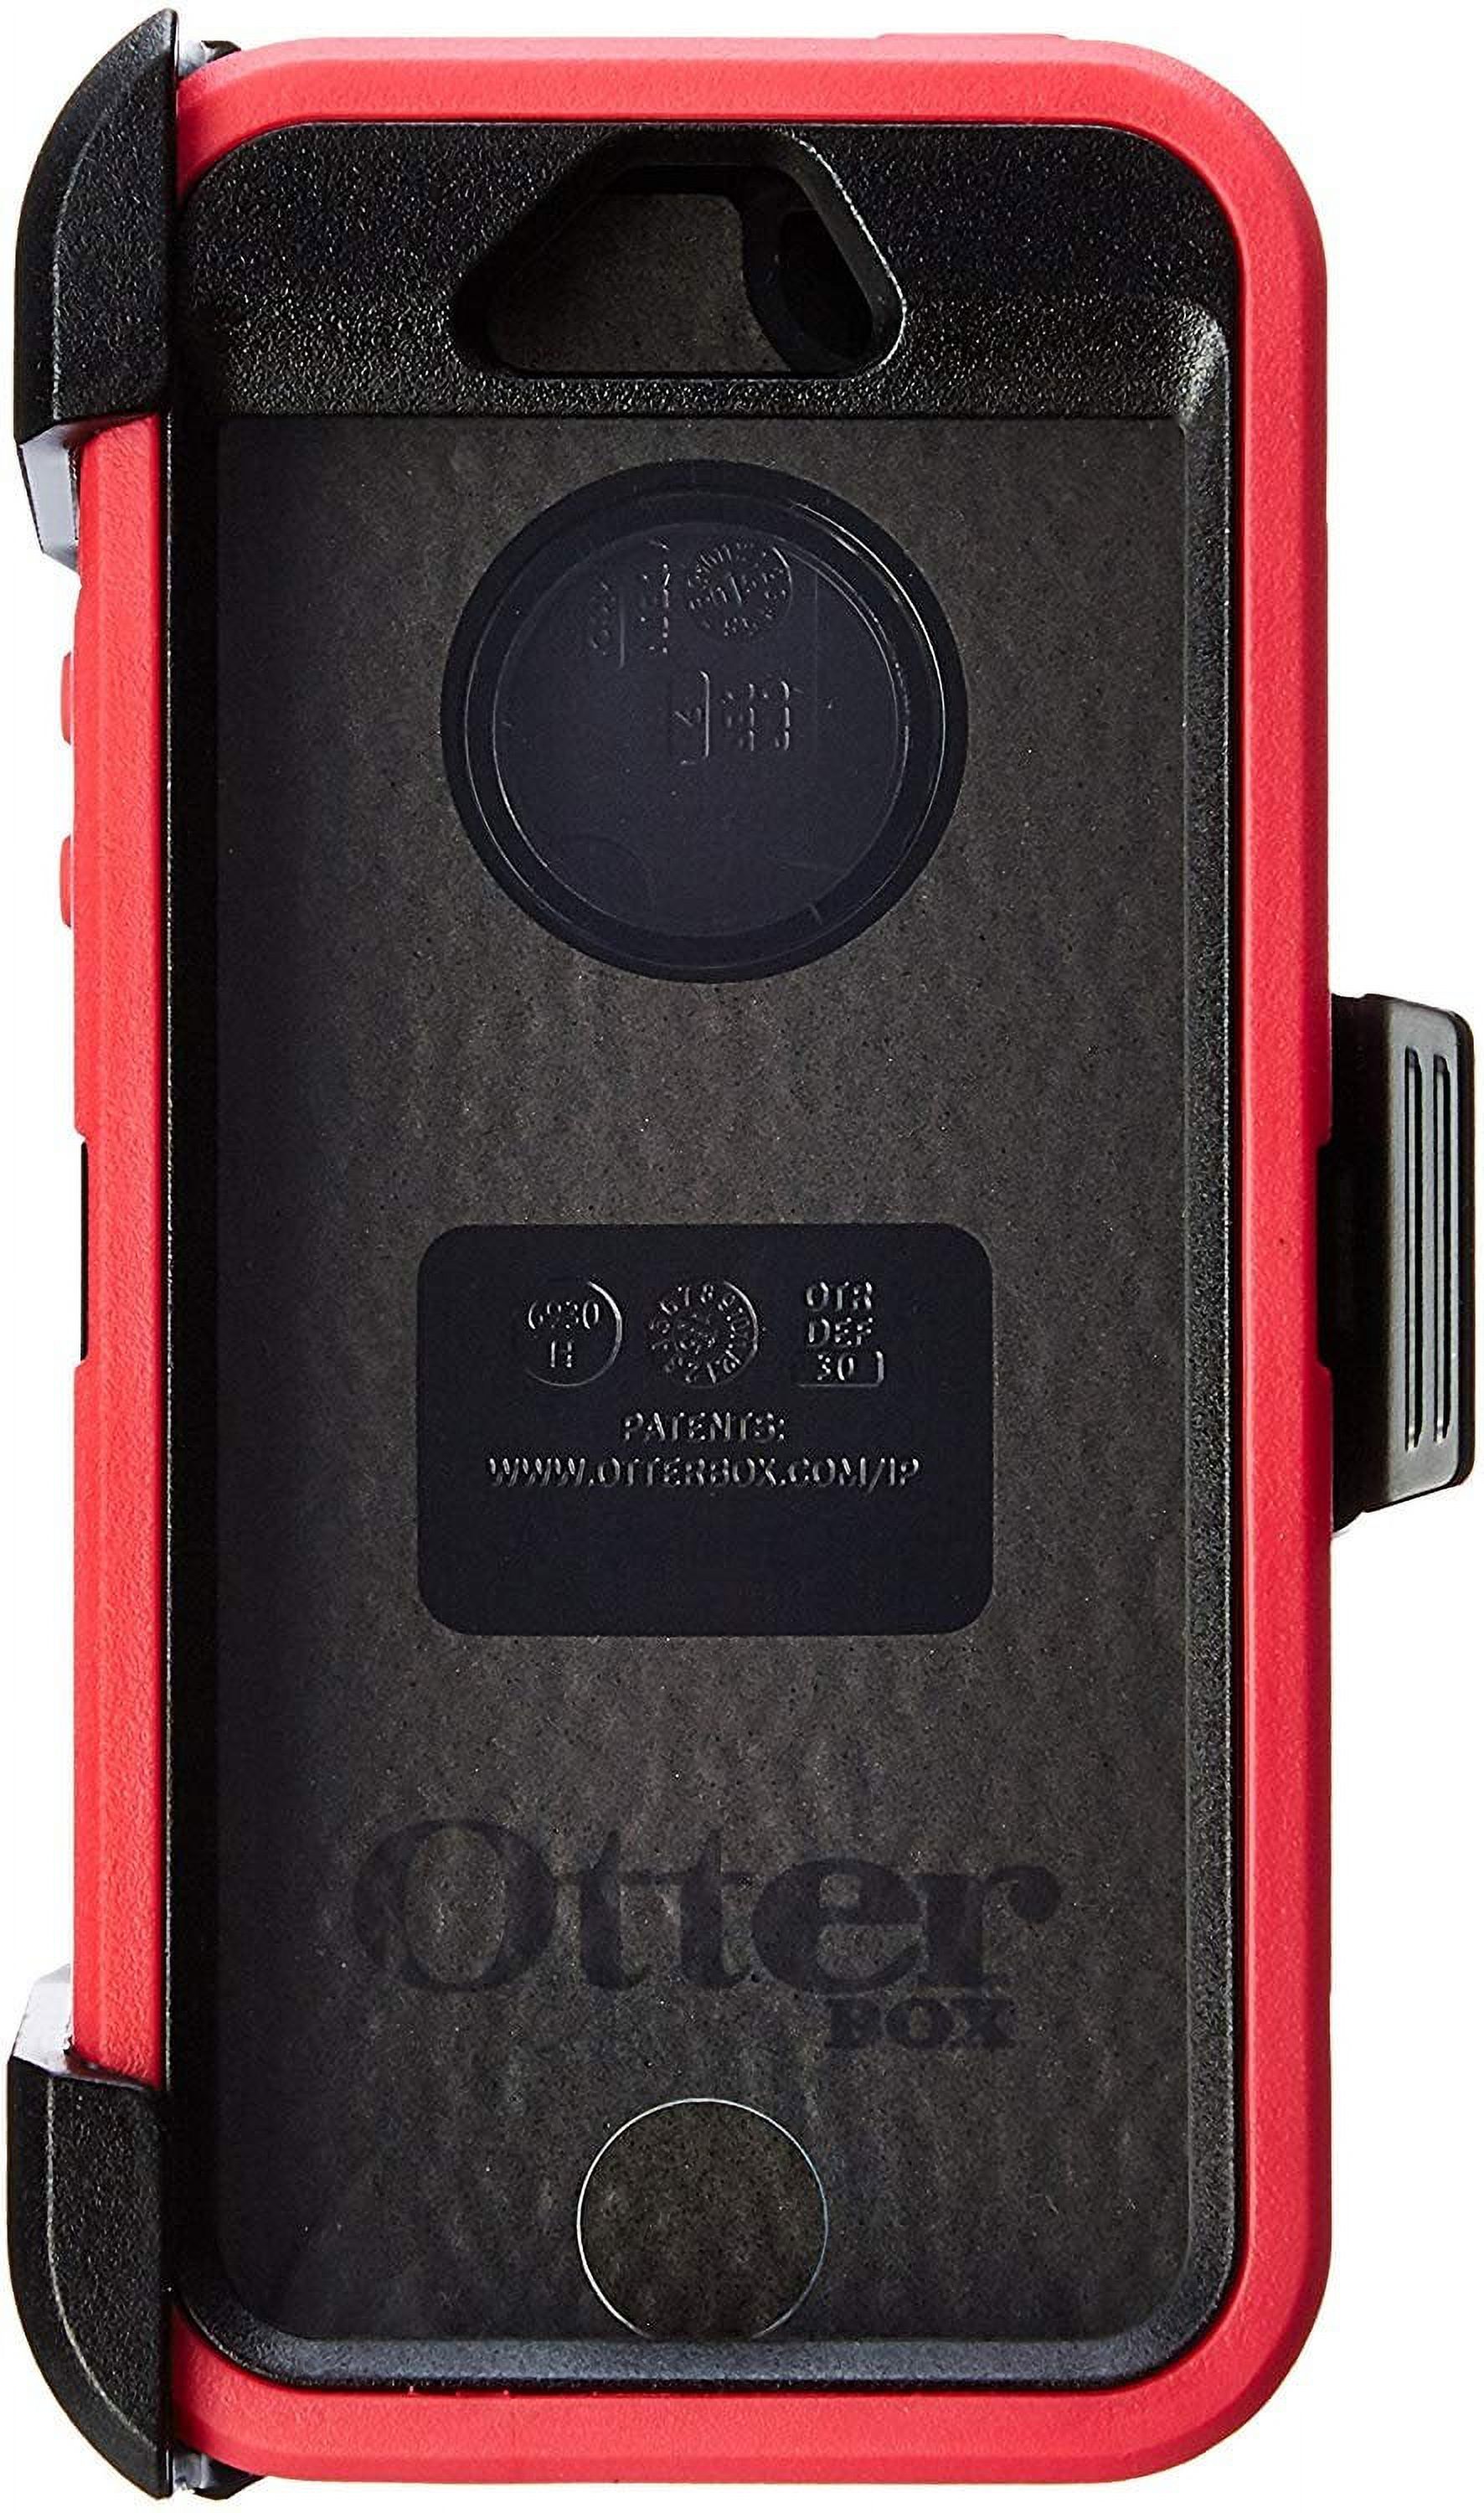 OtterBox Defender Carrying Case (Holster) Apple iPhone 5, iPhone 5s Smartphone, Raspberry - image 1 of 2